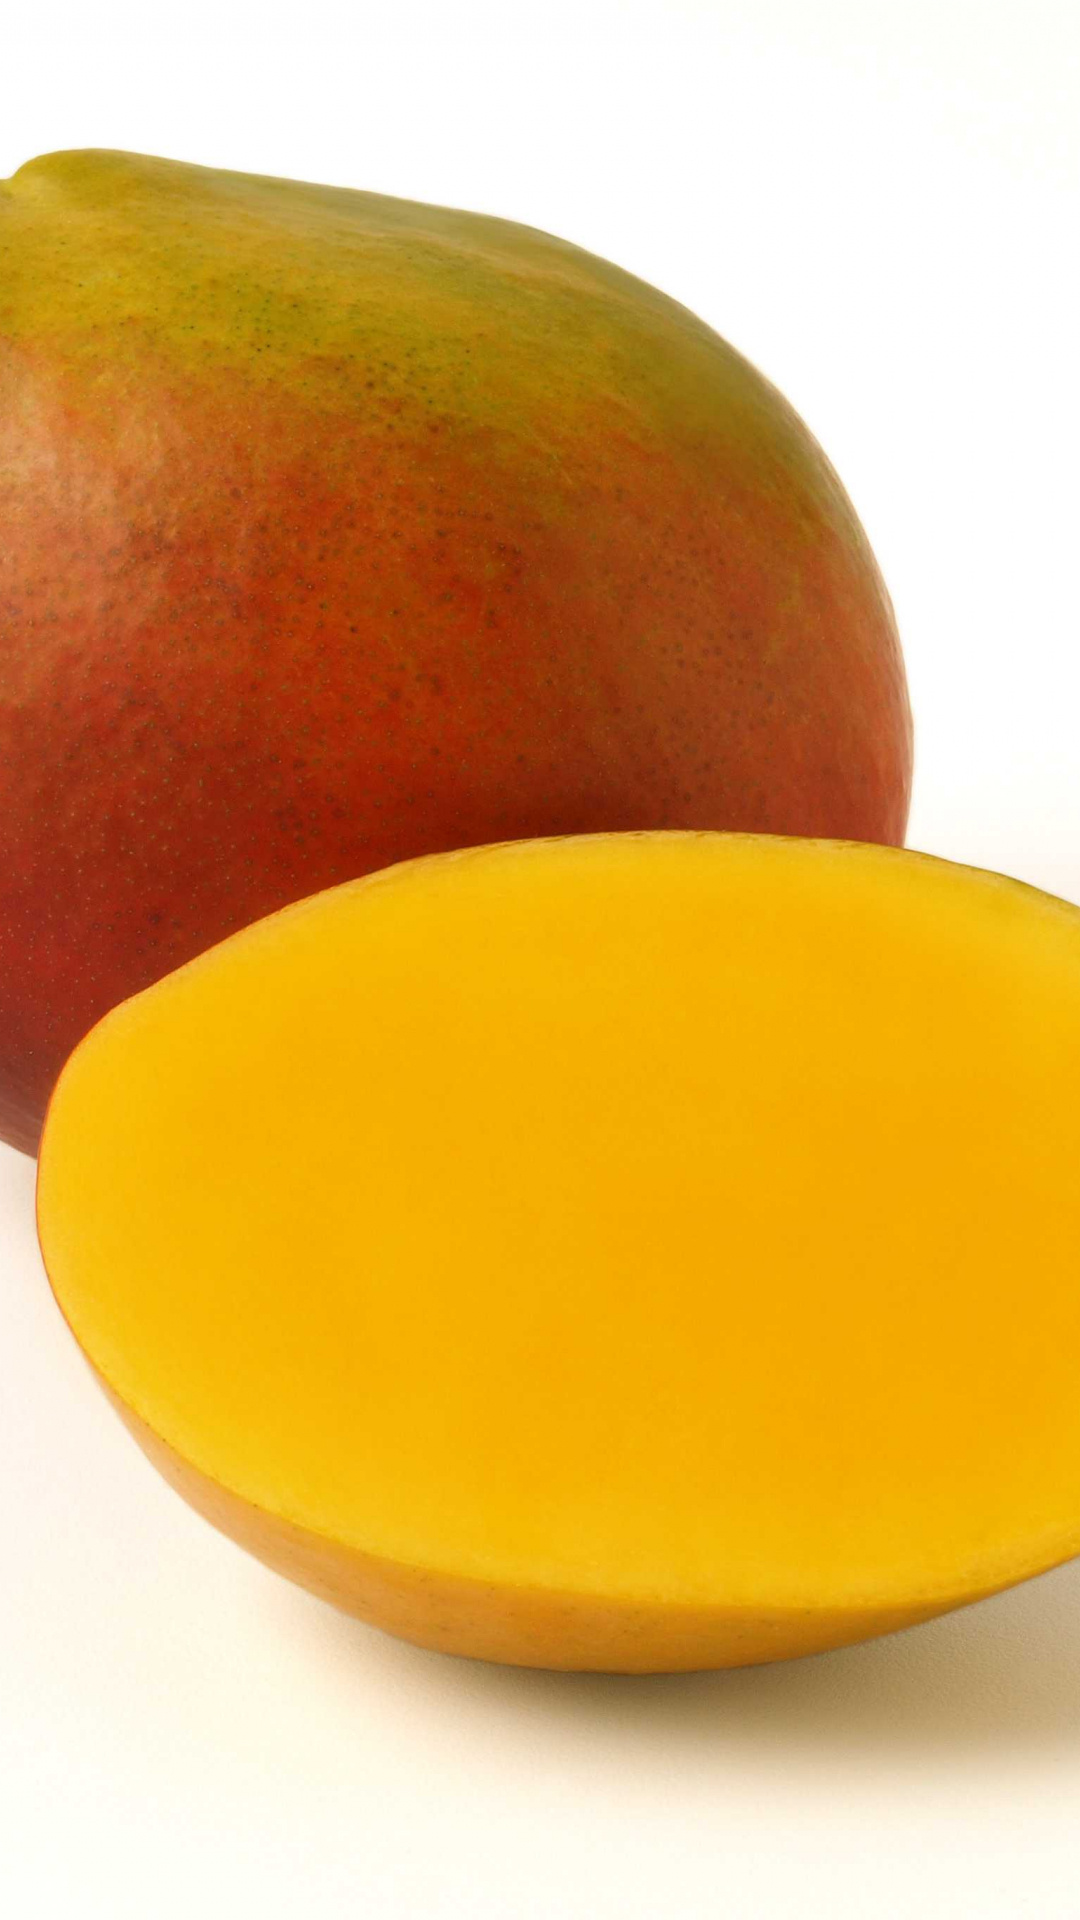 Mango: One of the most popular of all tropical fruits. 1080x1920 Full HD Wallpaper.